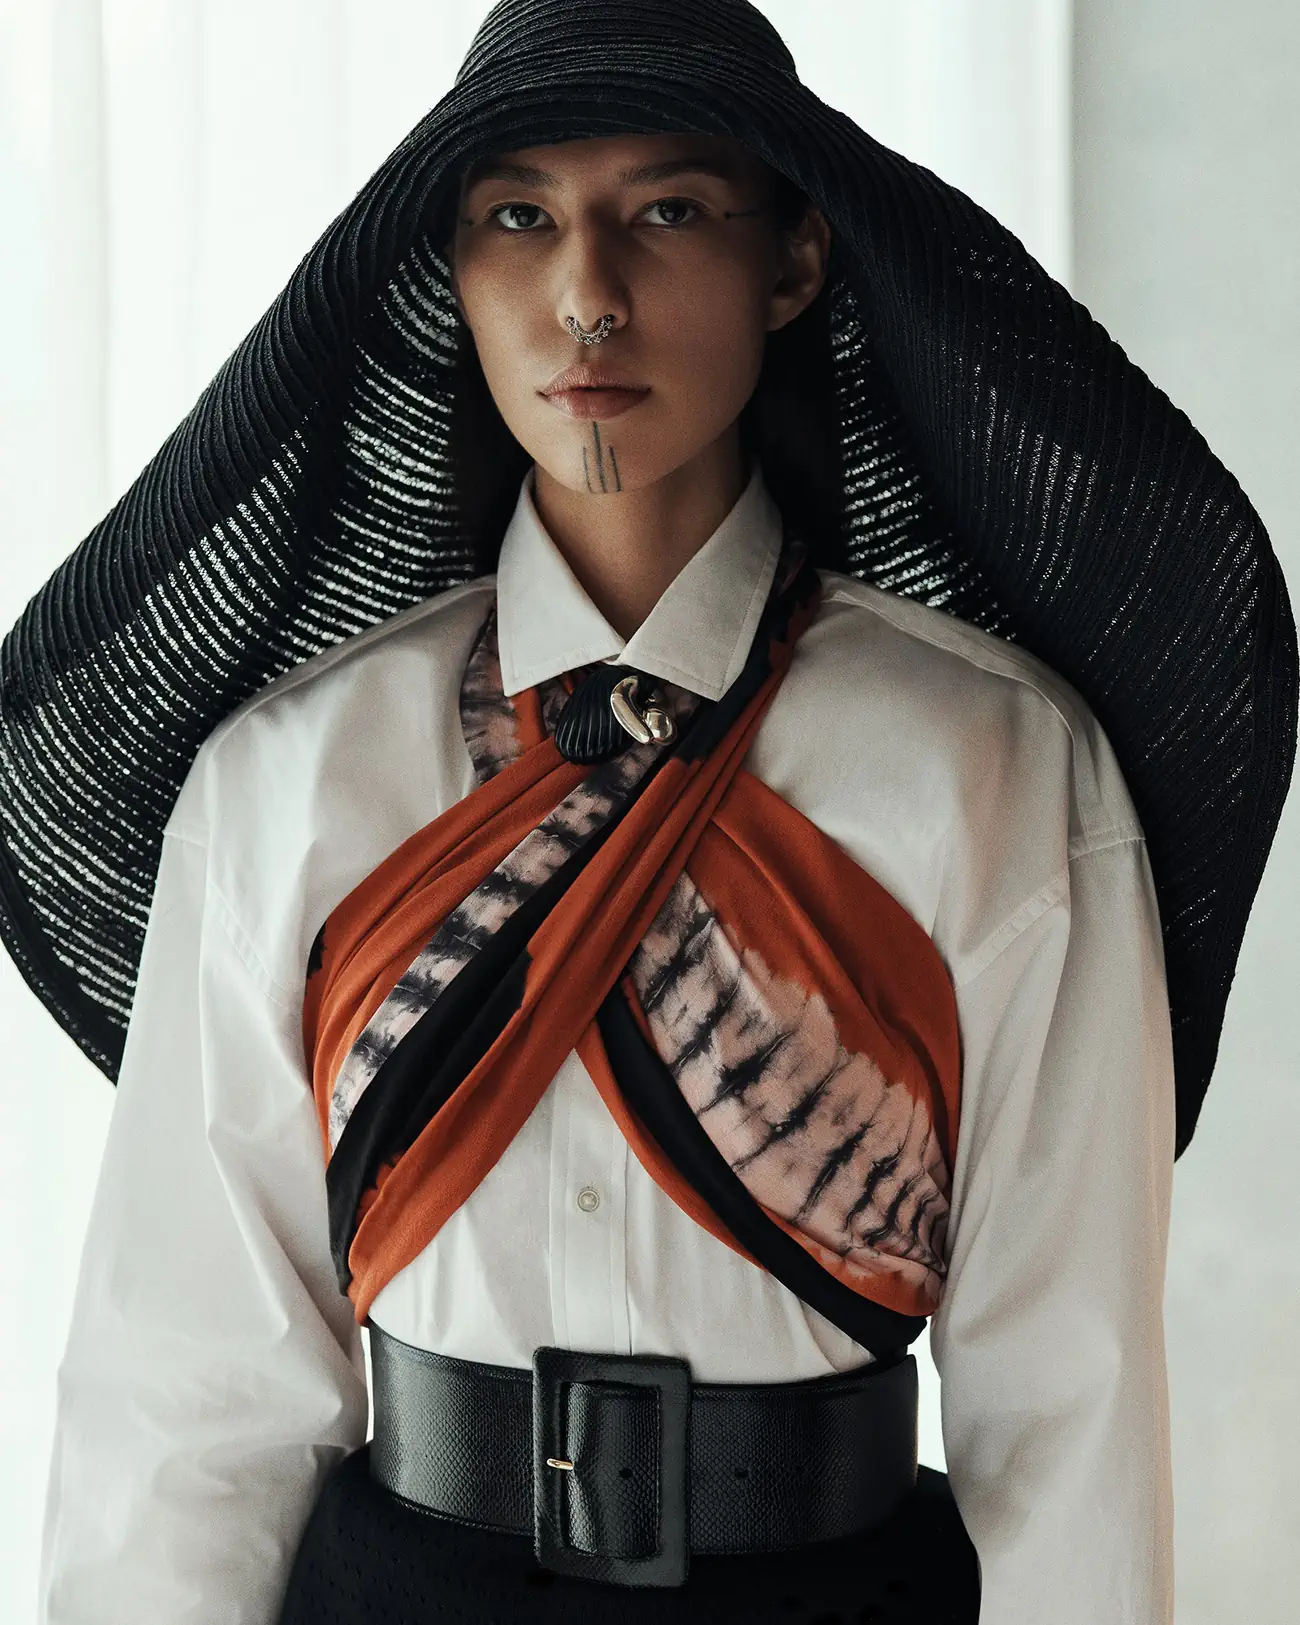 Quannah Chasinghorse and D’Pharaoh Woon-A-Tai by Blair Getz Mezibov for Vogue Global May 2023